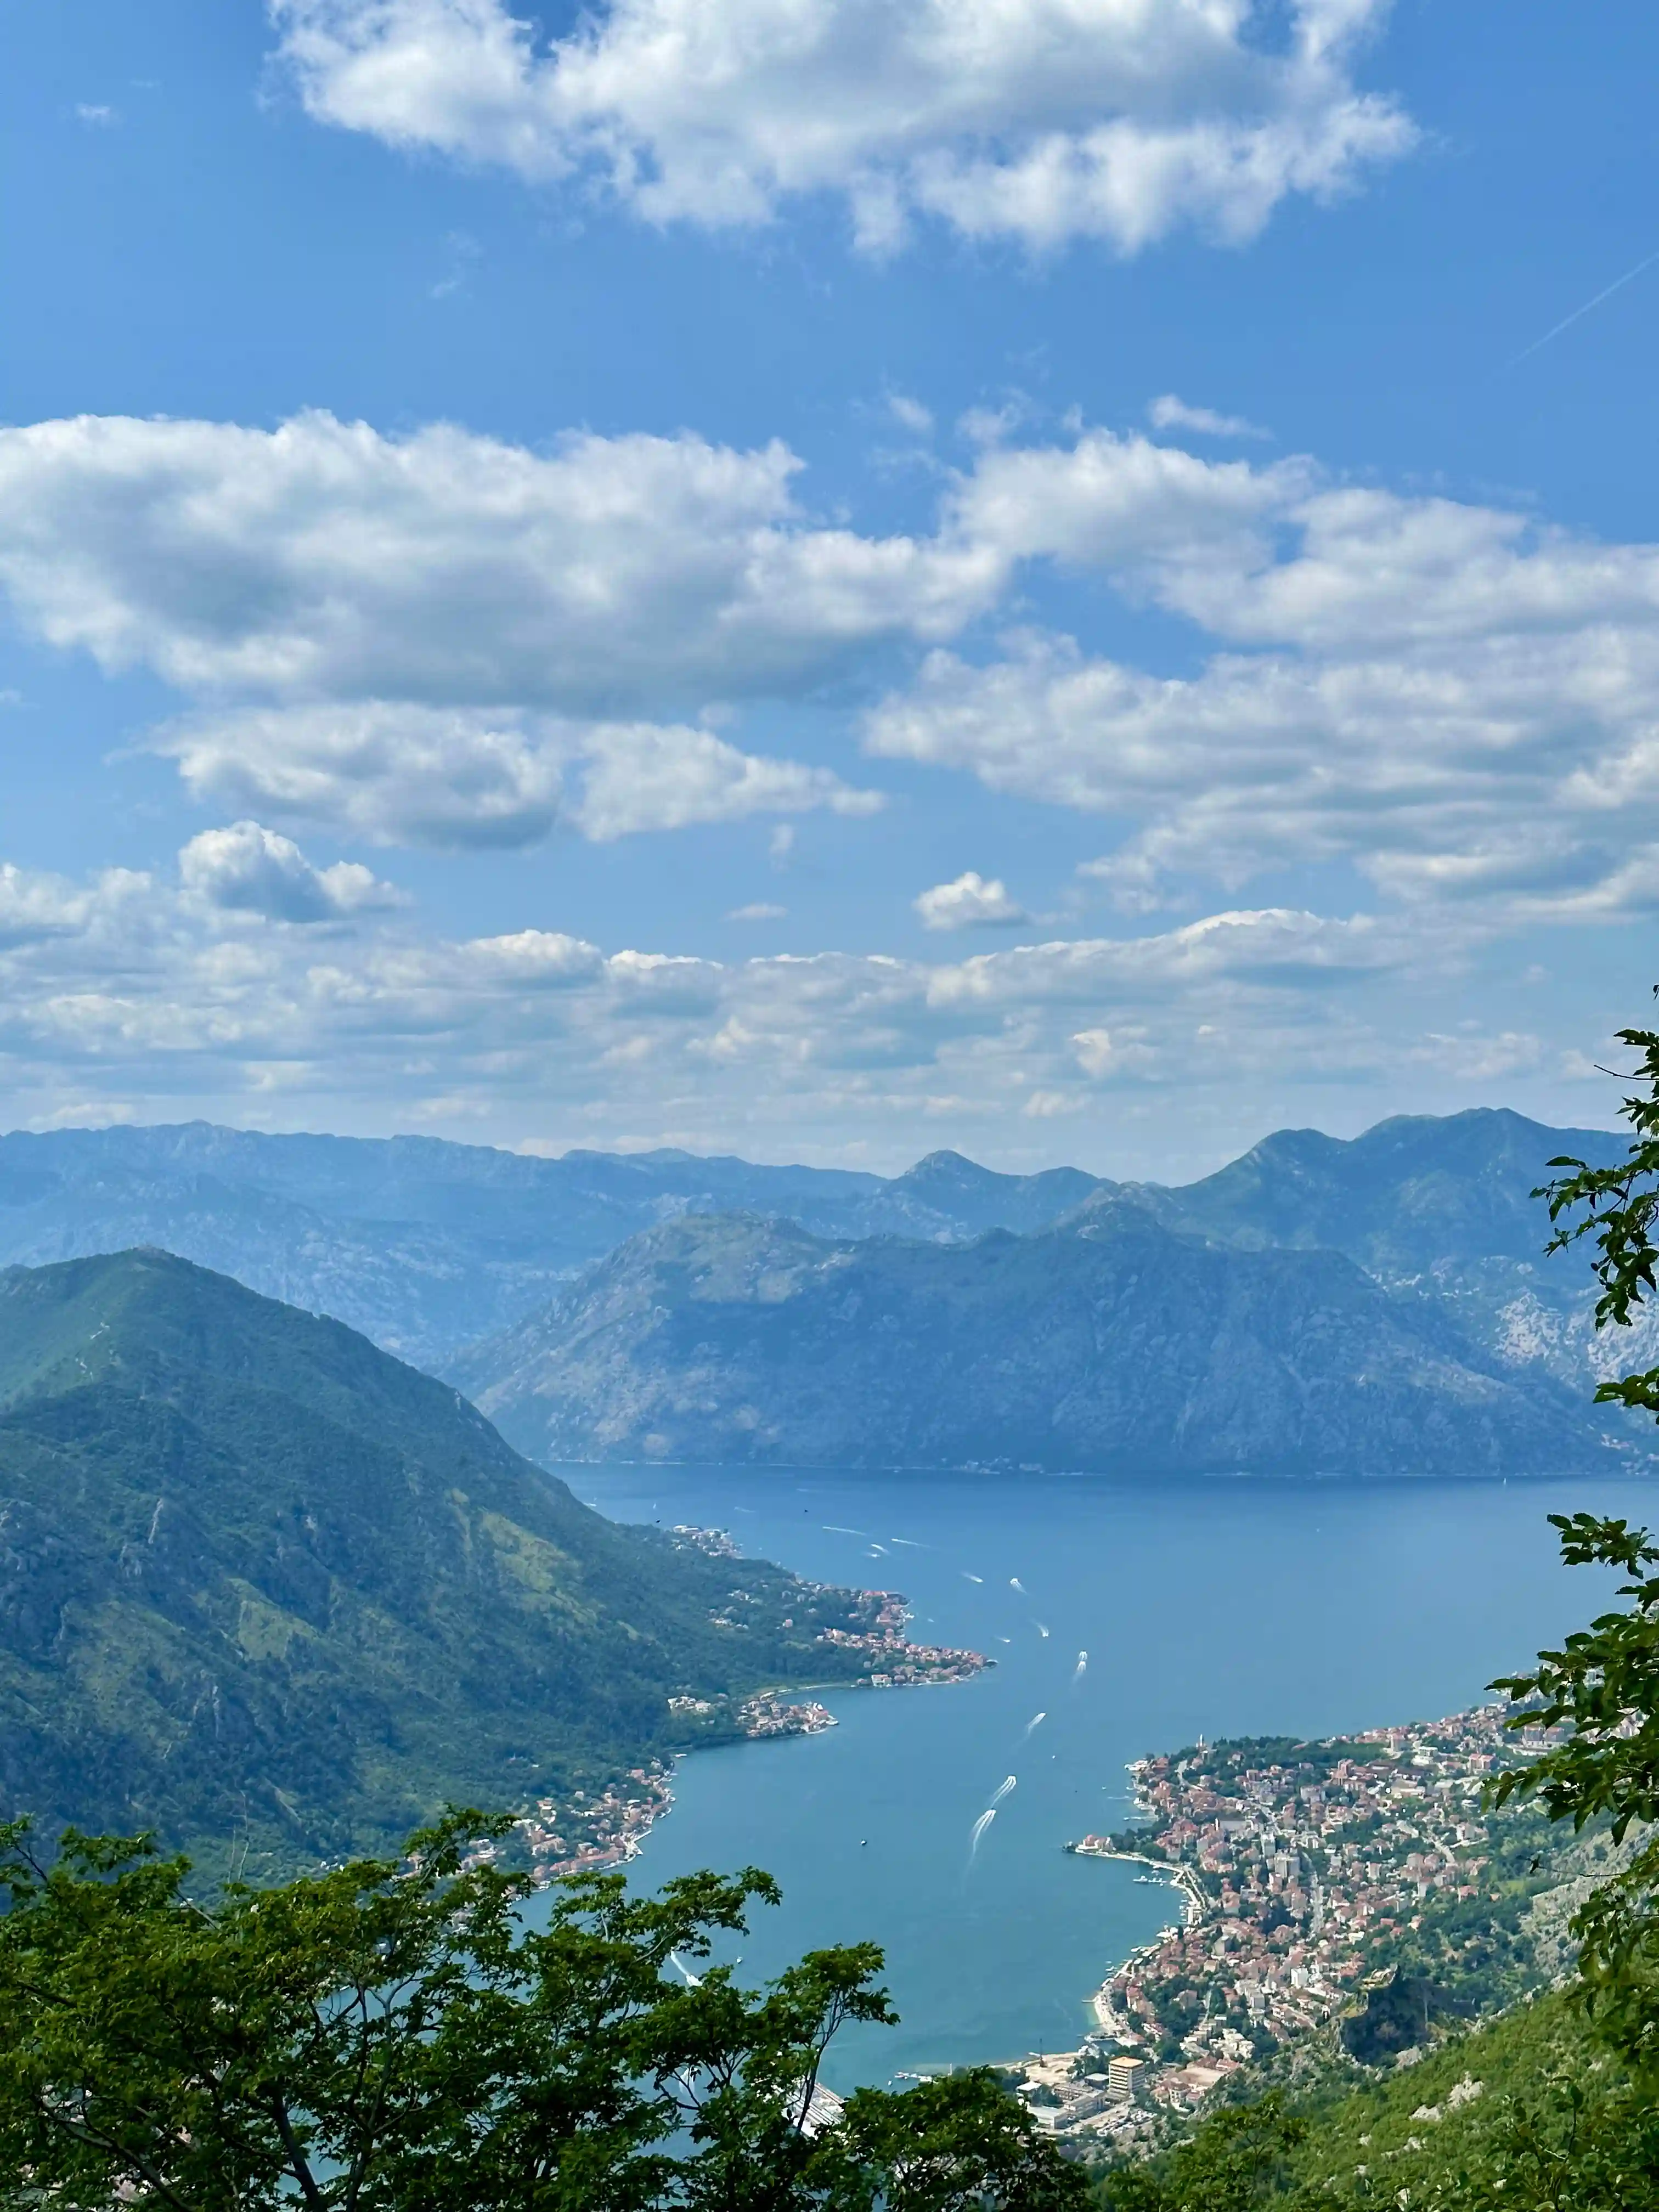 Imagine How long does the Ladder of Kotor take to hike? in Kotor